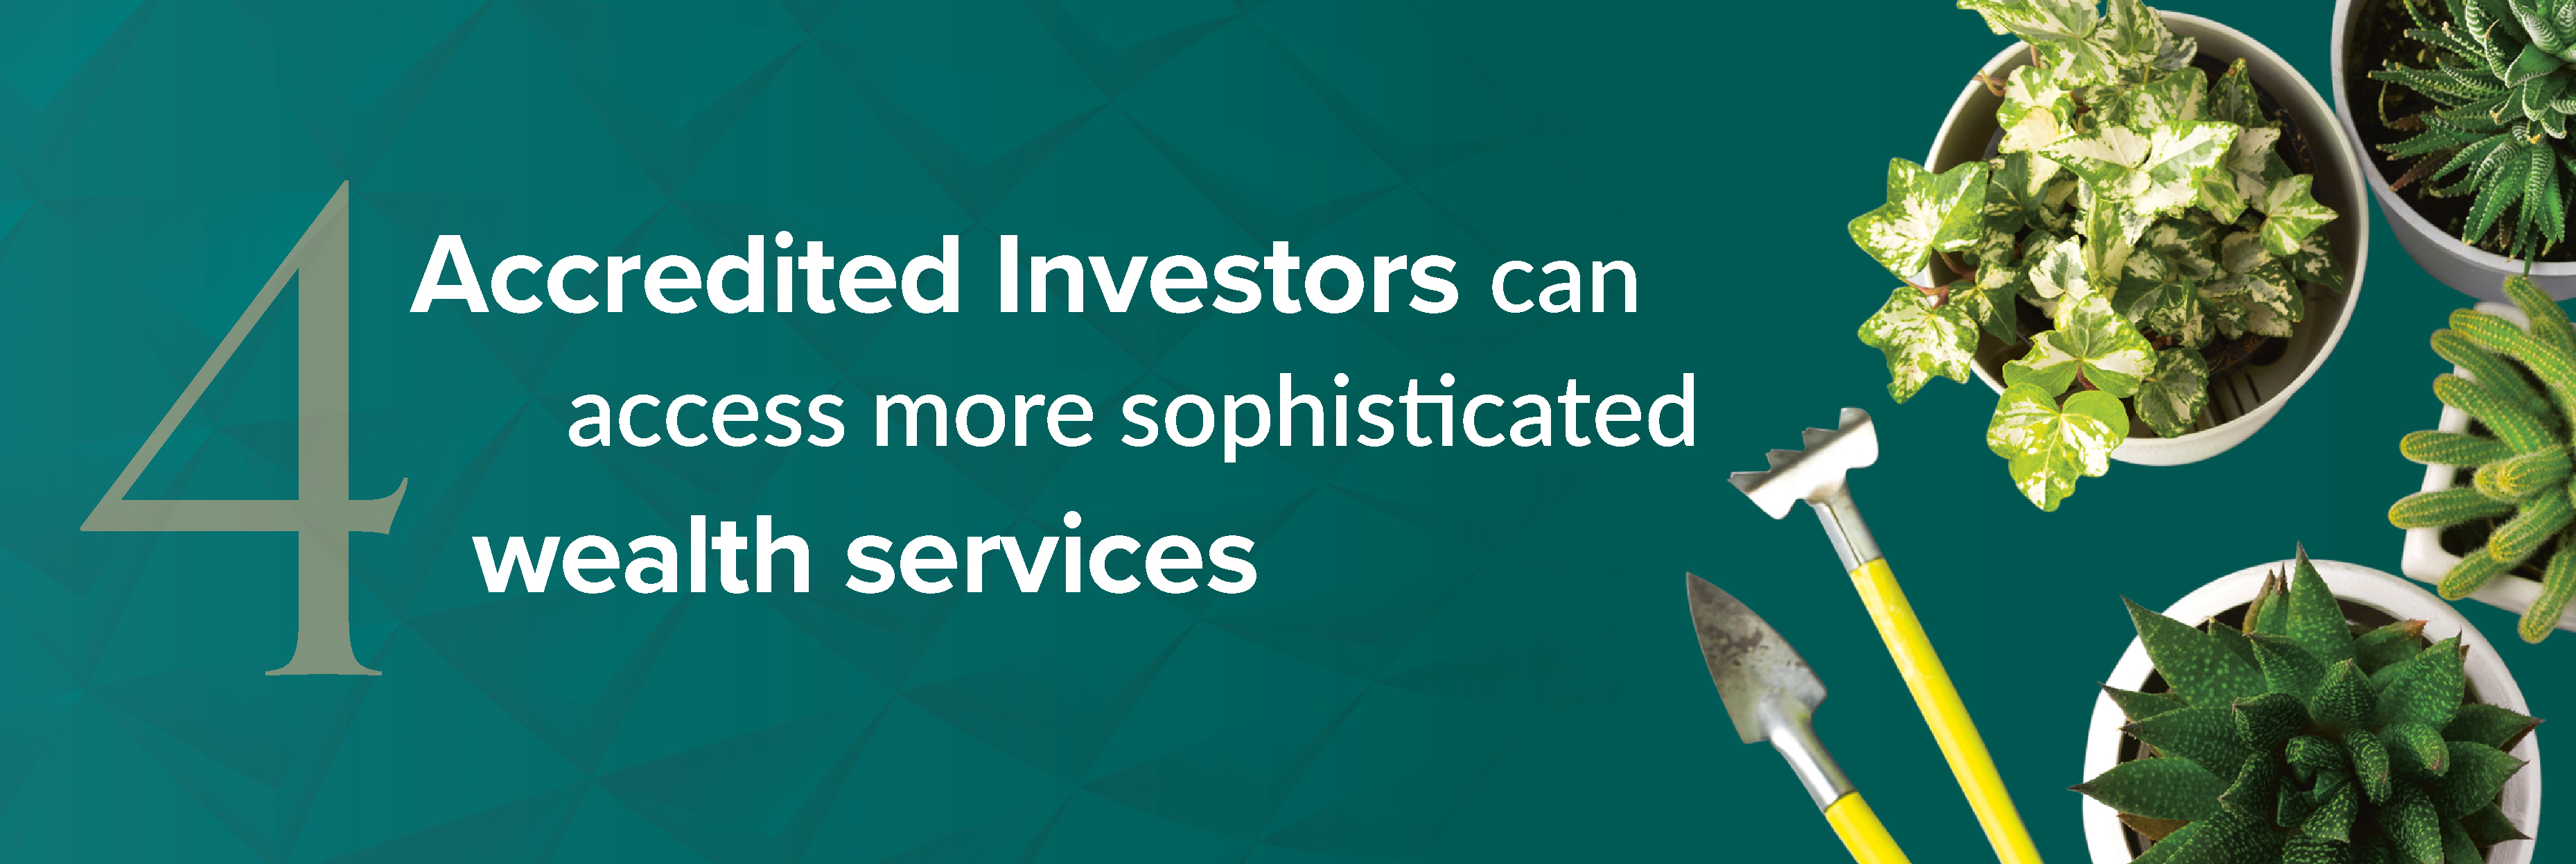 Accredited investors can access more sophisticated wealth services.